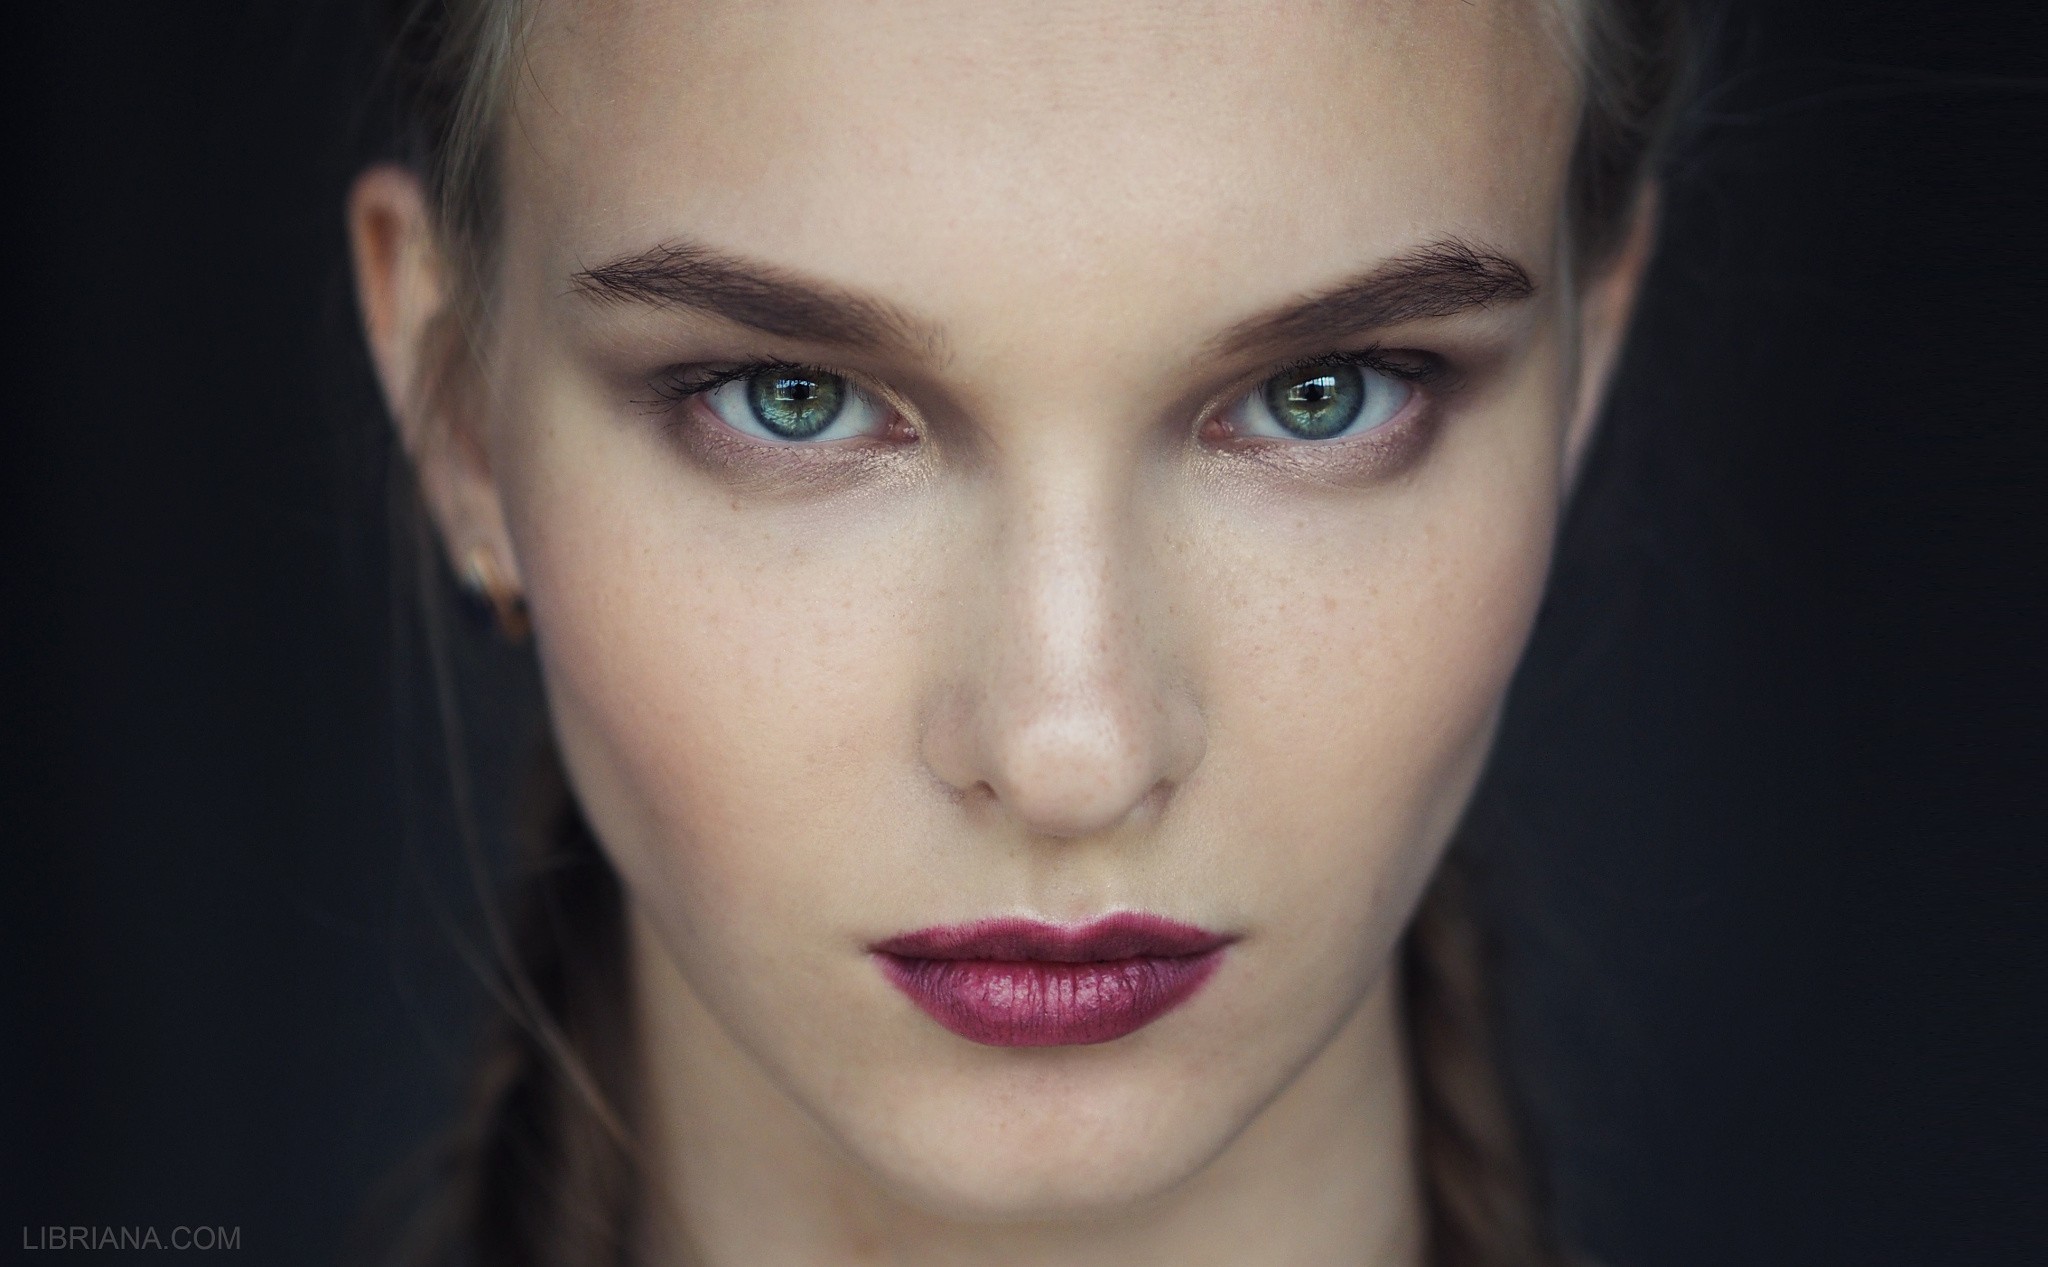 People 2048x1267 women model face eyes makeup looking at viewer portrait simple background Libriana closeup women indoors indoors watermarked lipstick studio